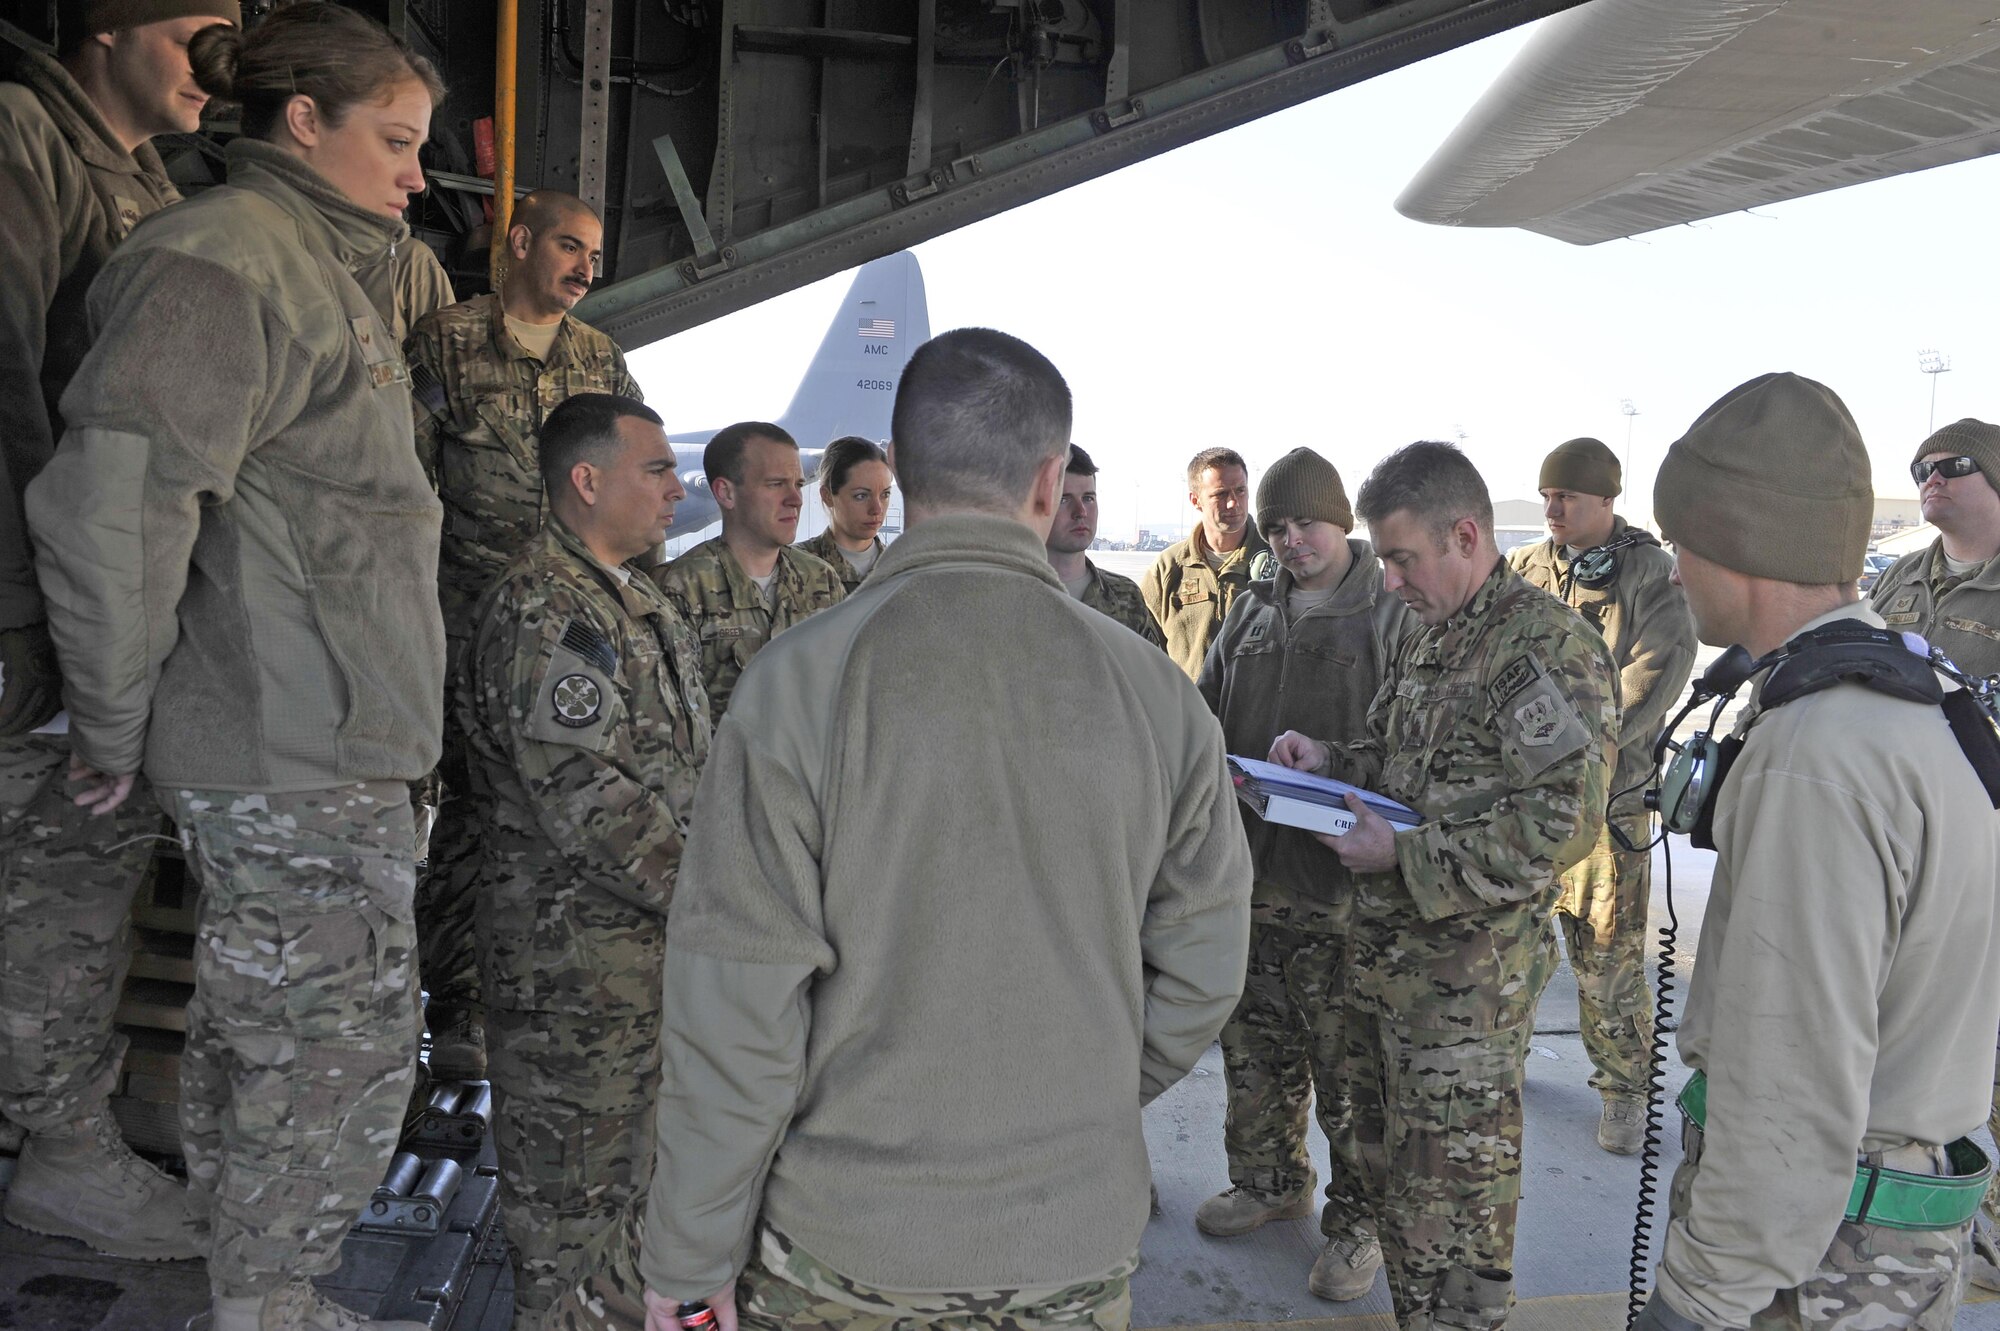 Maj. Kurt Wampole briefs his crew and passengers Jan. 9, 2013, before his flight out of Bagram Airfield, Afghanistan. Wampole was on the first of the C-130H Hercules model aircraft to permanently relocate out of Bagram to make room for the newer C-130J model aircraft. Wampole is a C-130 pilot. (U.S. Air Force photo/Senior Master Sgt. Gary J. Rihn)